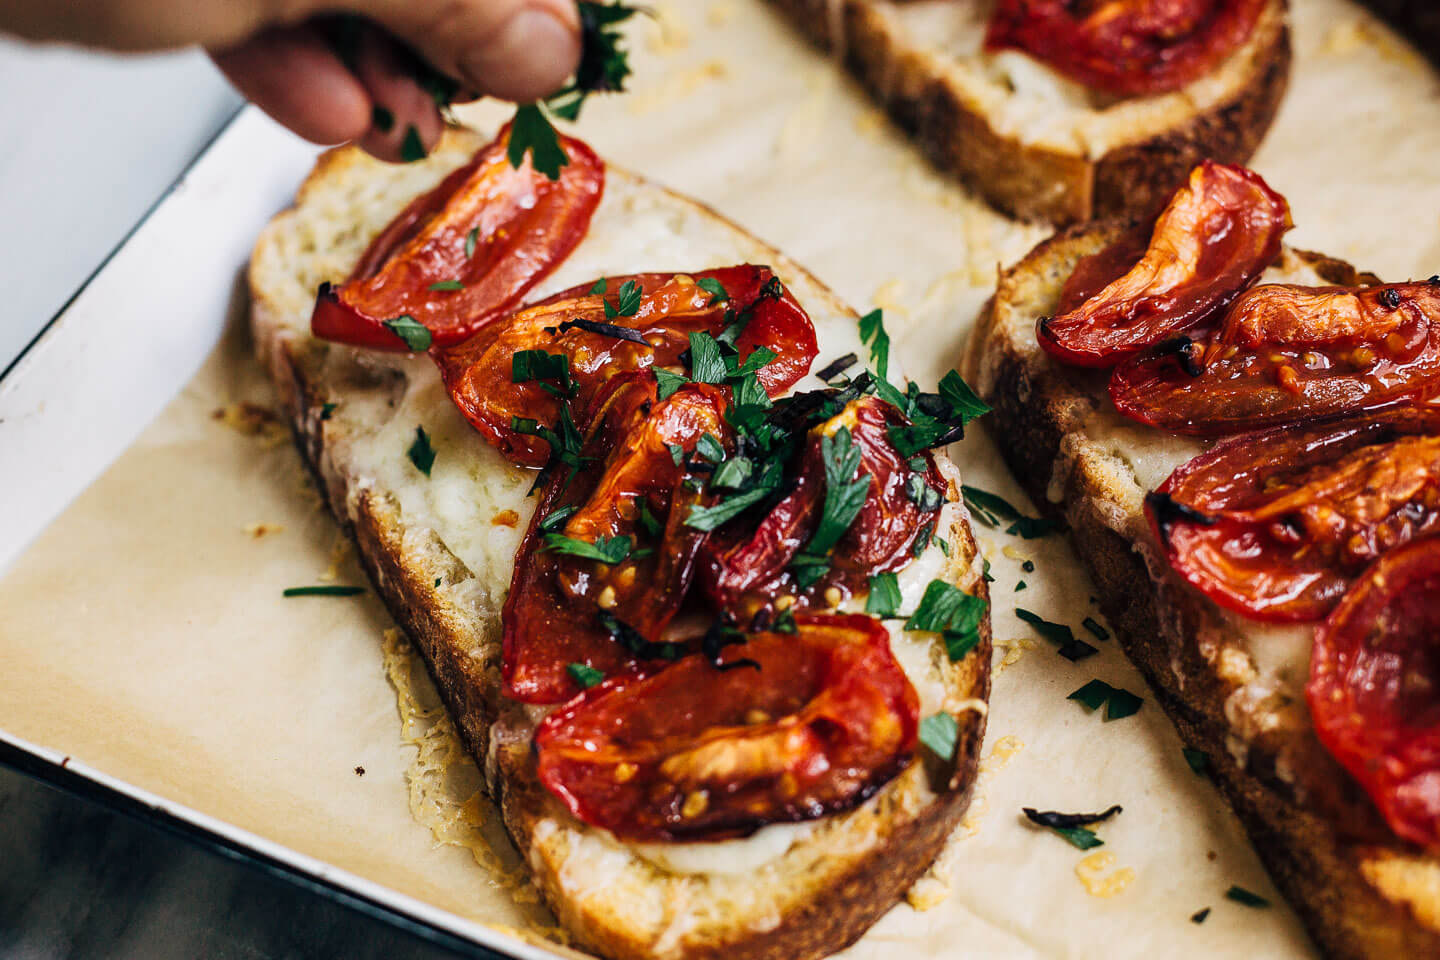 Celebrating the height of tomato season with sumptuous Gruyere and roasted tomato tartines made with thick-cut sourdough and punchy garlic butter.